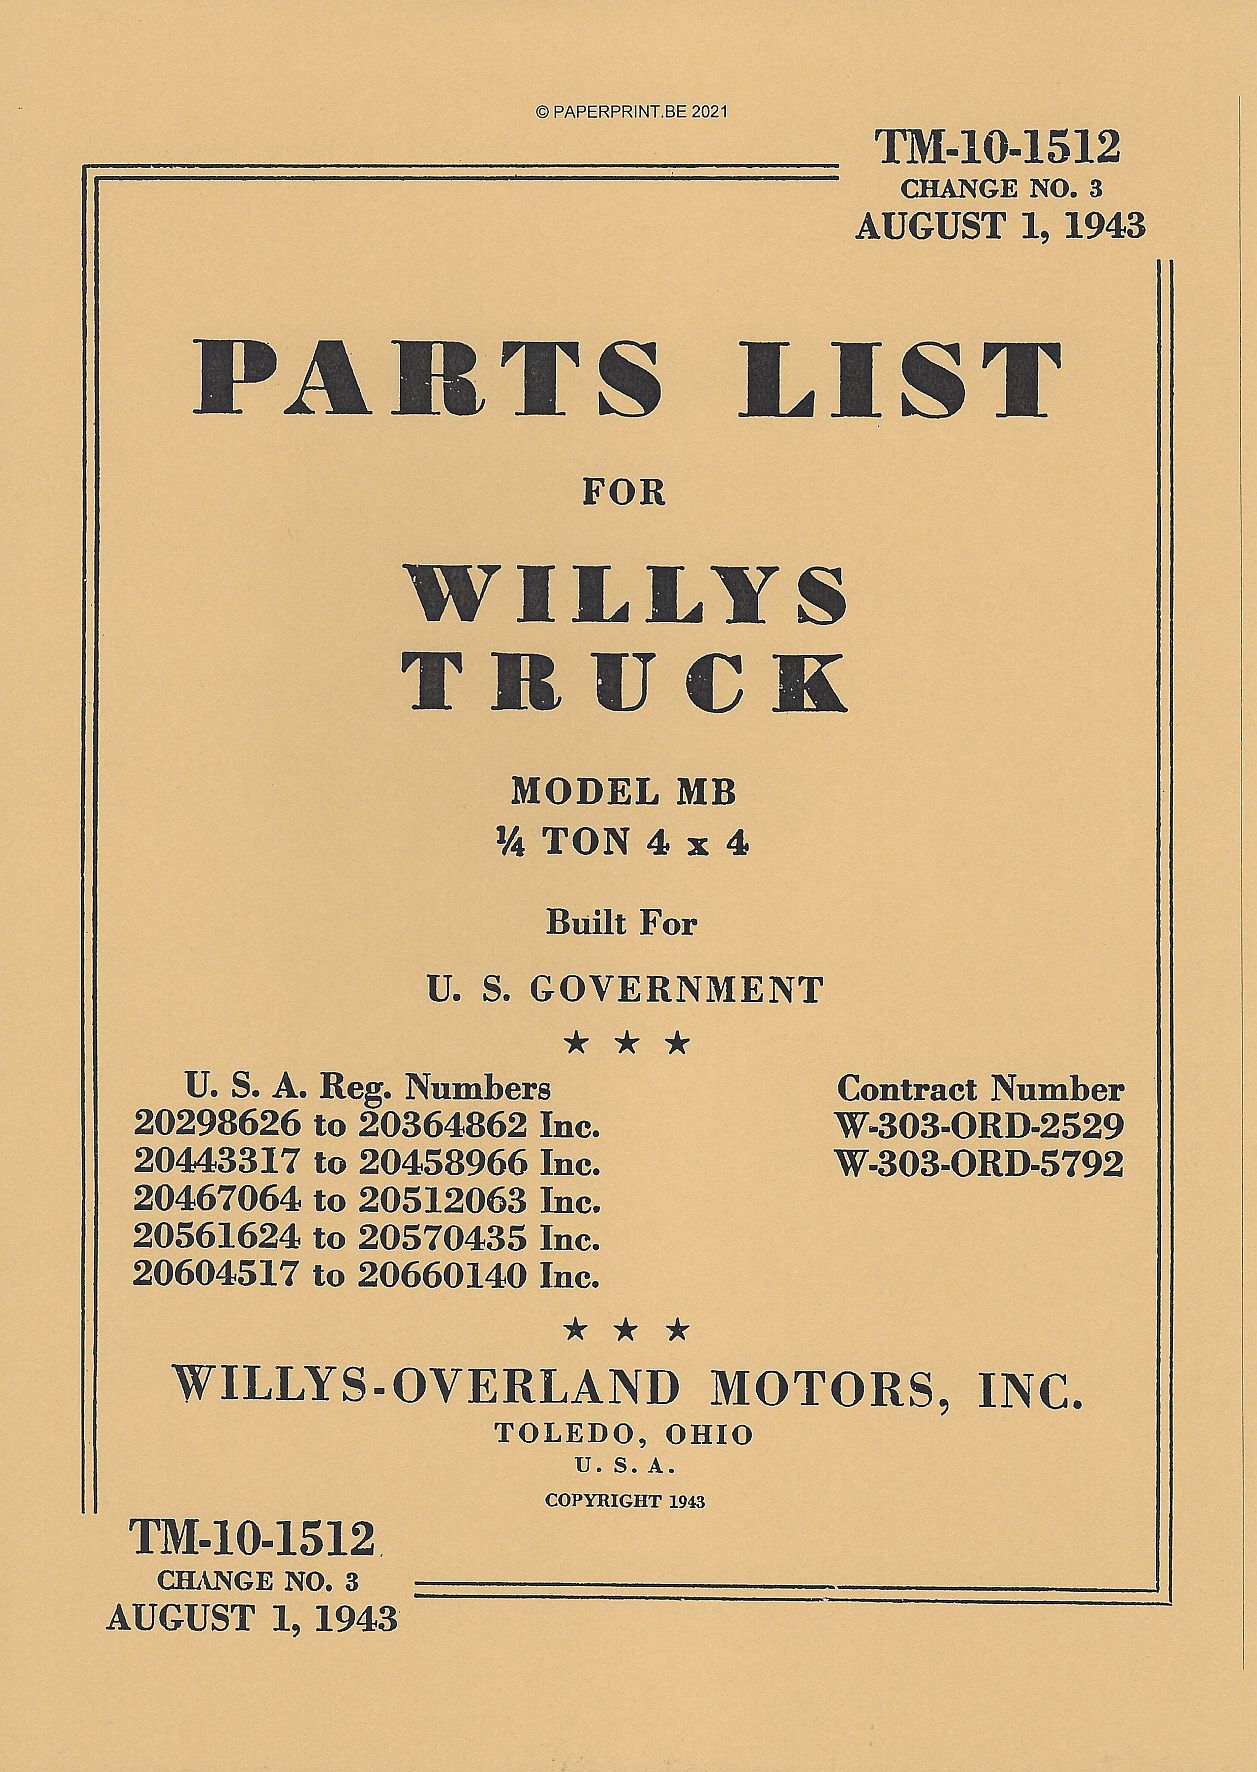 TM 10-1512 US PARTS LIST FOR WILLYS TRUCK MODEL MB